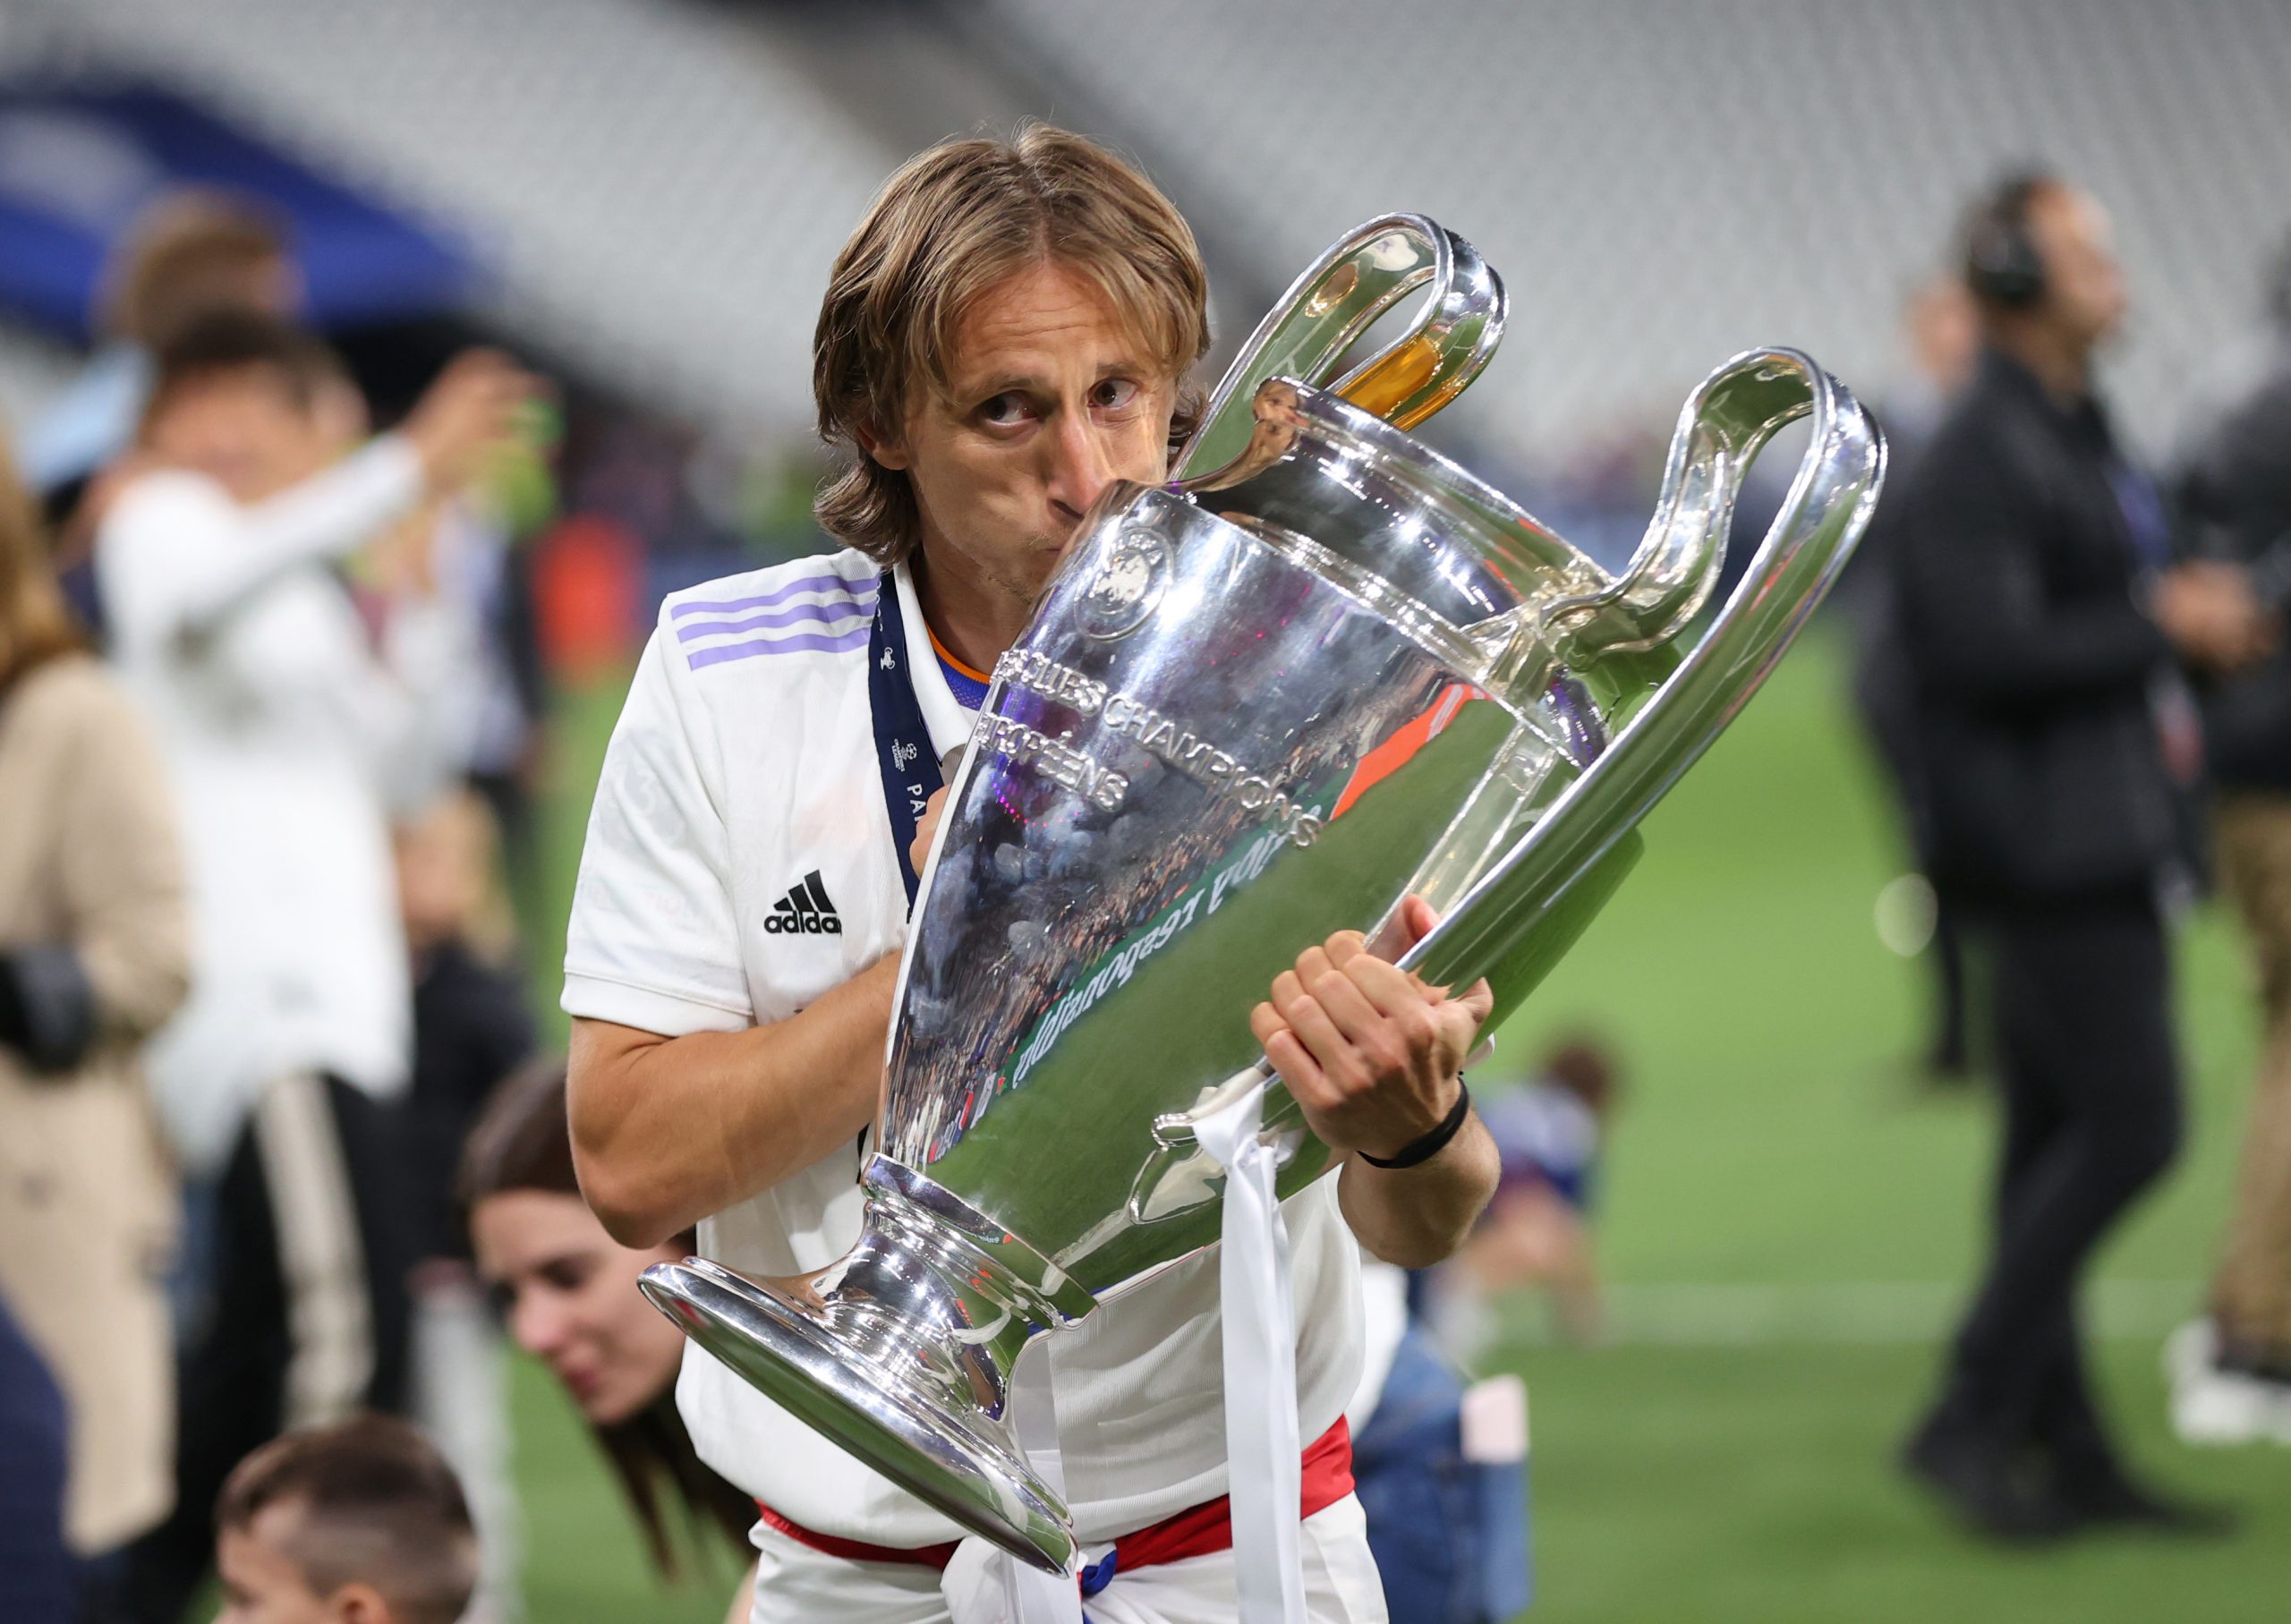 Luka Modrić: "Signing for Real Madrid was one of the best decisions of my  life." - Get Spanish Football News